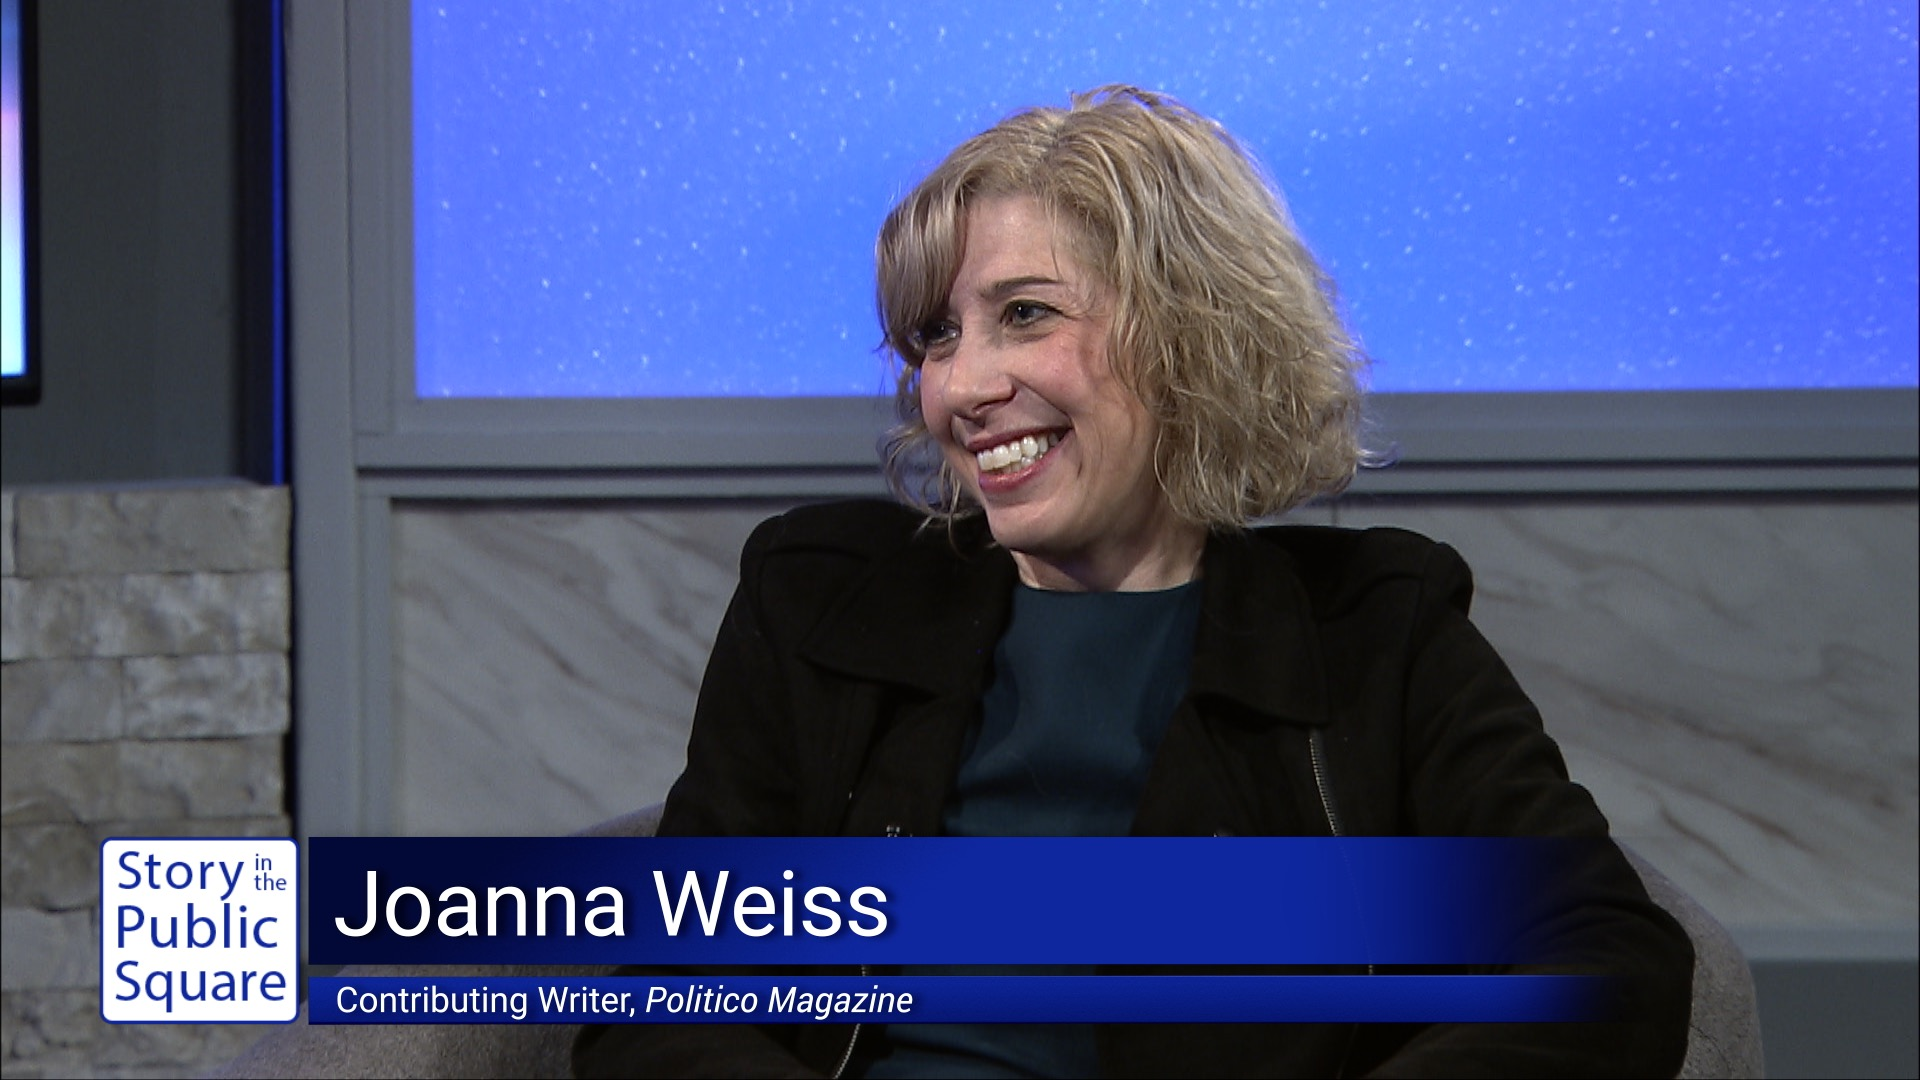 Analyzing American Politics Through a Pop-Culture Lens with Joanna Weiss